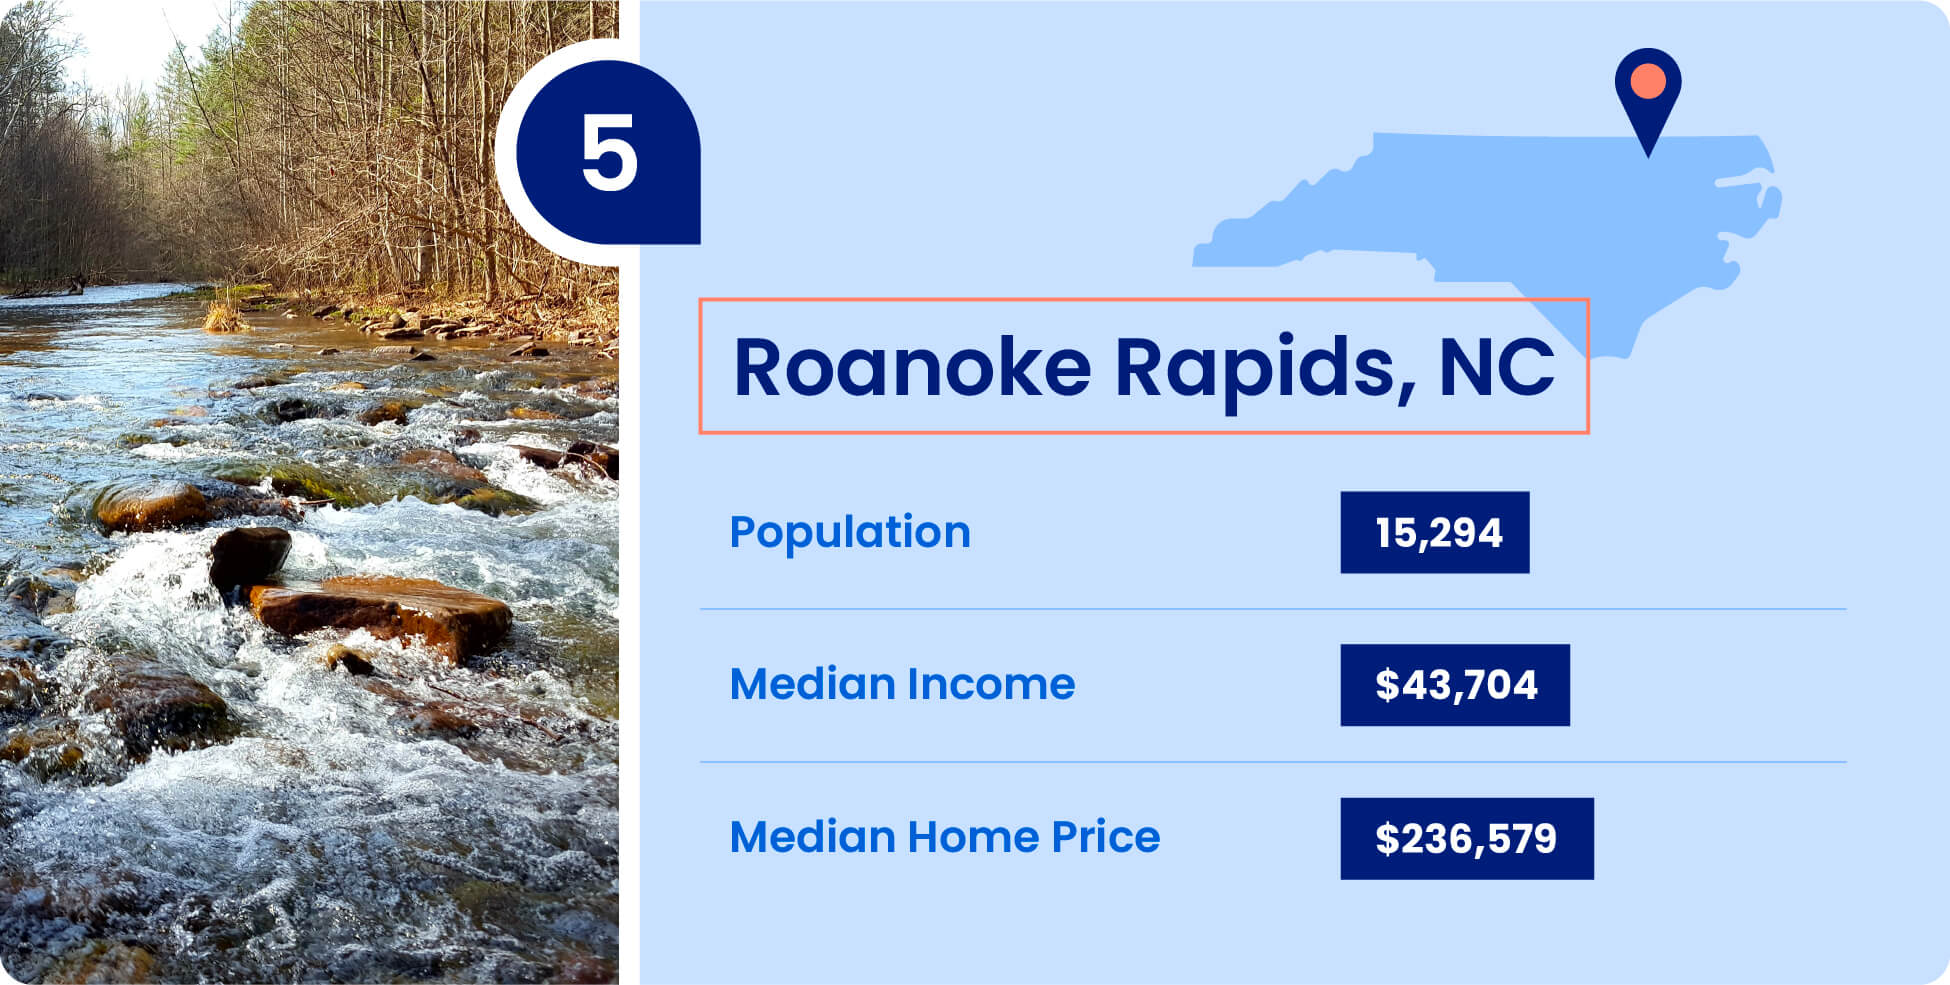 Population, median income, and median home price for Roanoke Rapids, one of the cheapest places to live in North Carolina.